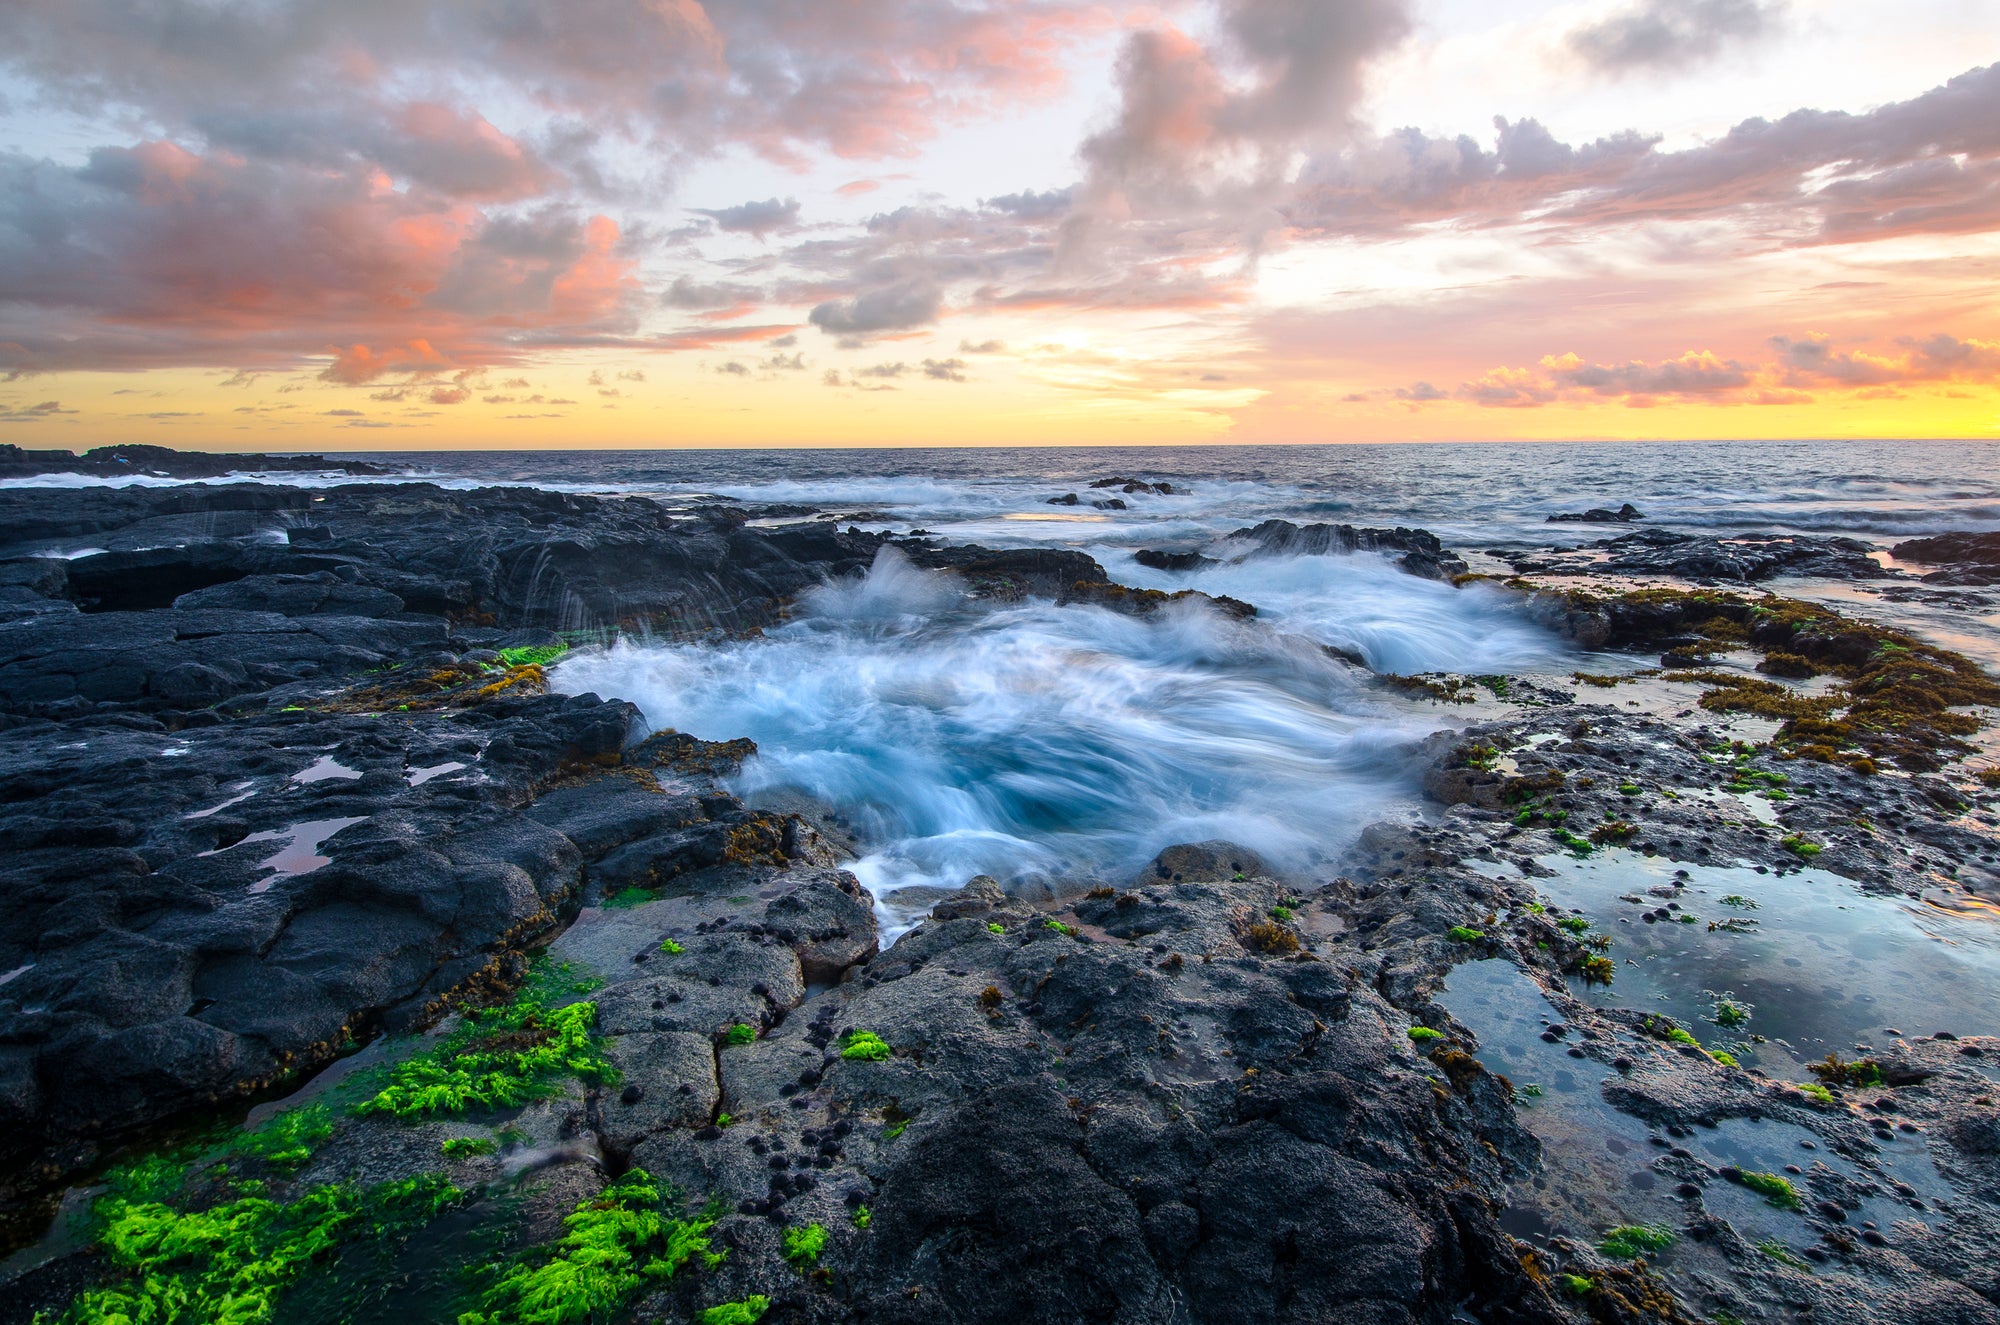 Sunset at Pele's Well on the Big Island of Hawaii